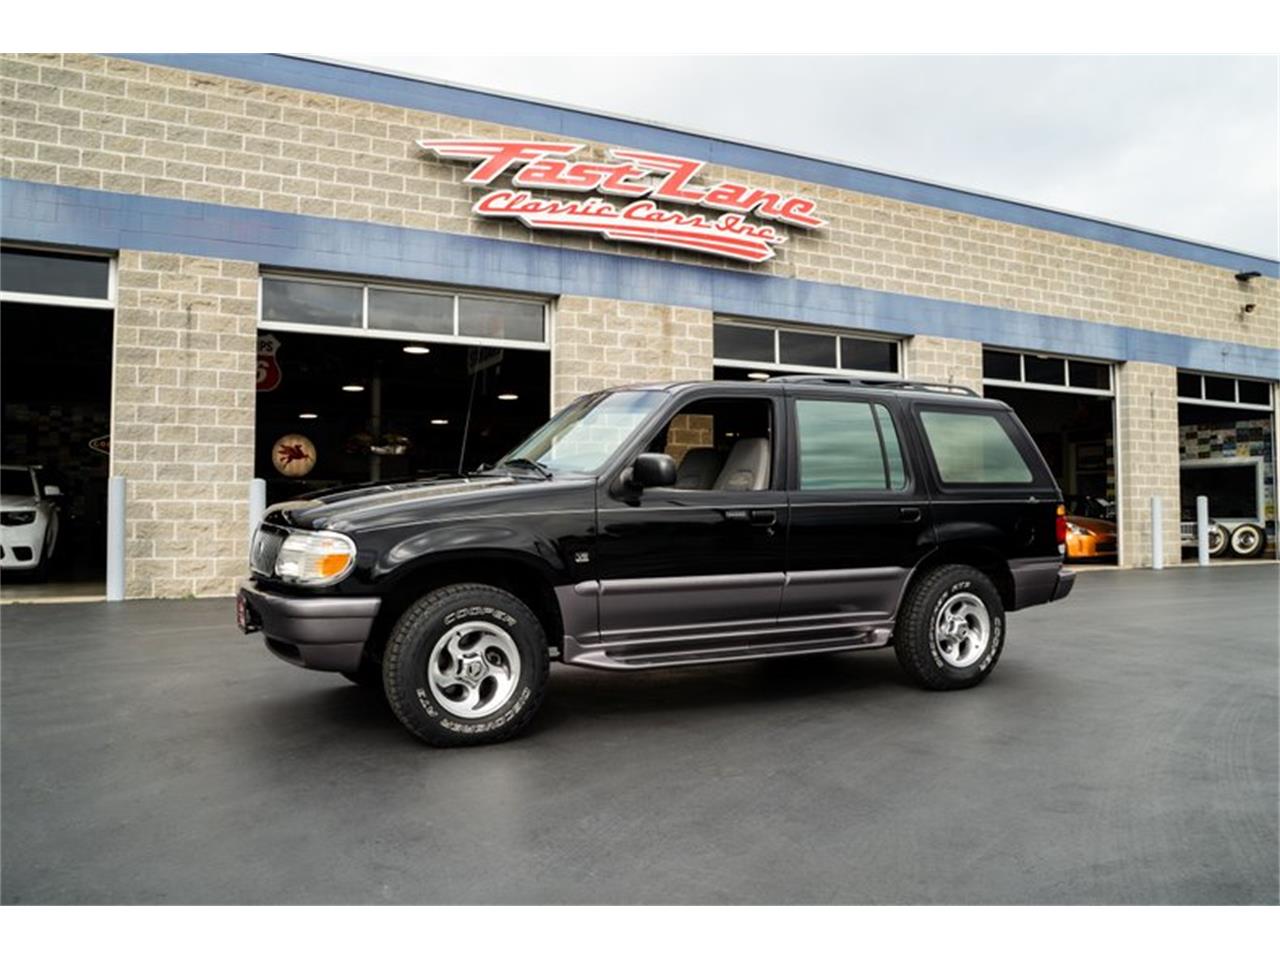 For Sale: 1997 Mercury Mountaineer in St. Charles, Missouri for sale in Saint Charles, MO